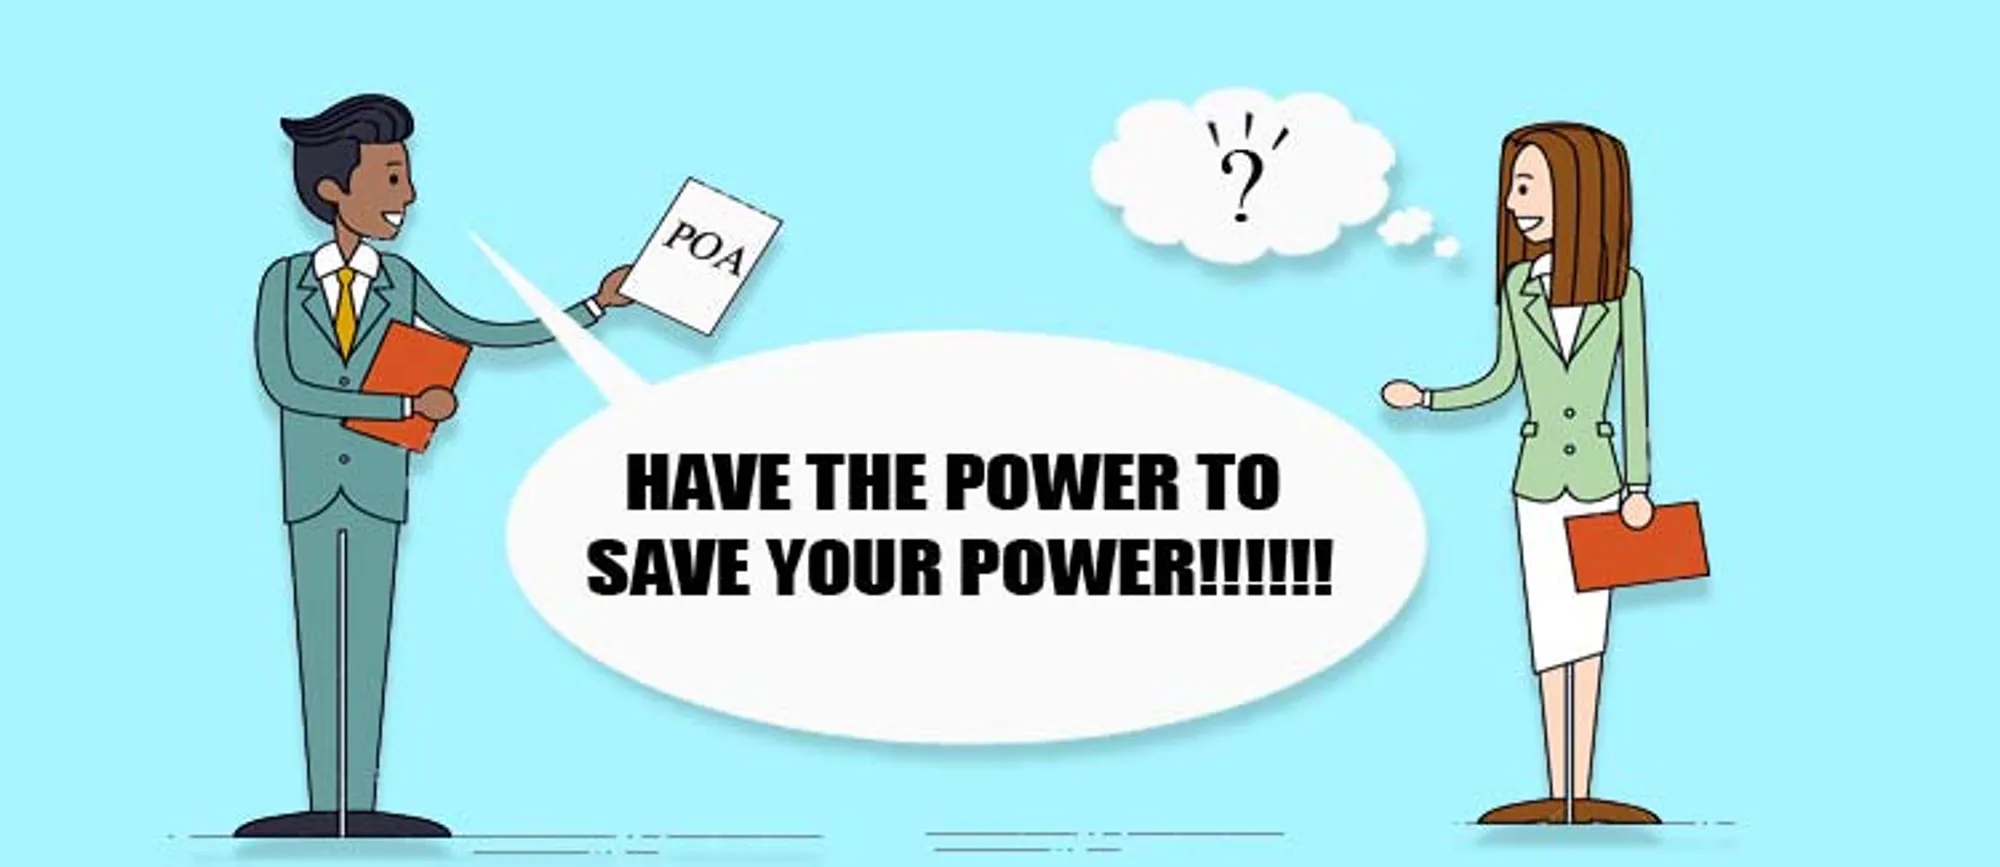 General POA - Power of Attorney